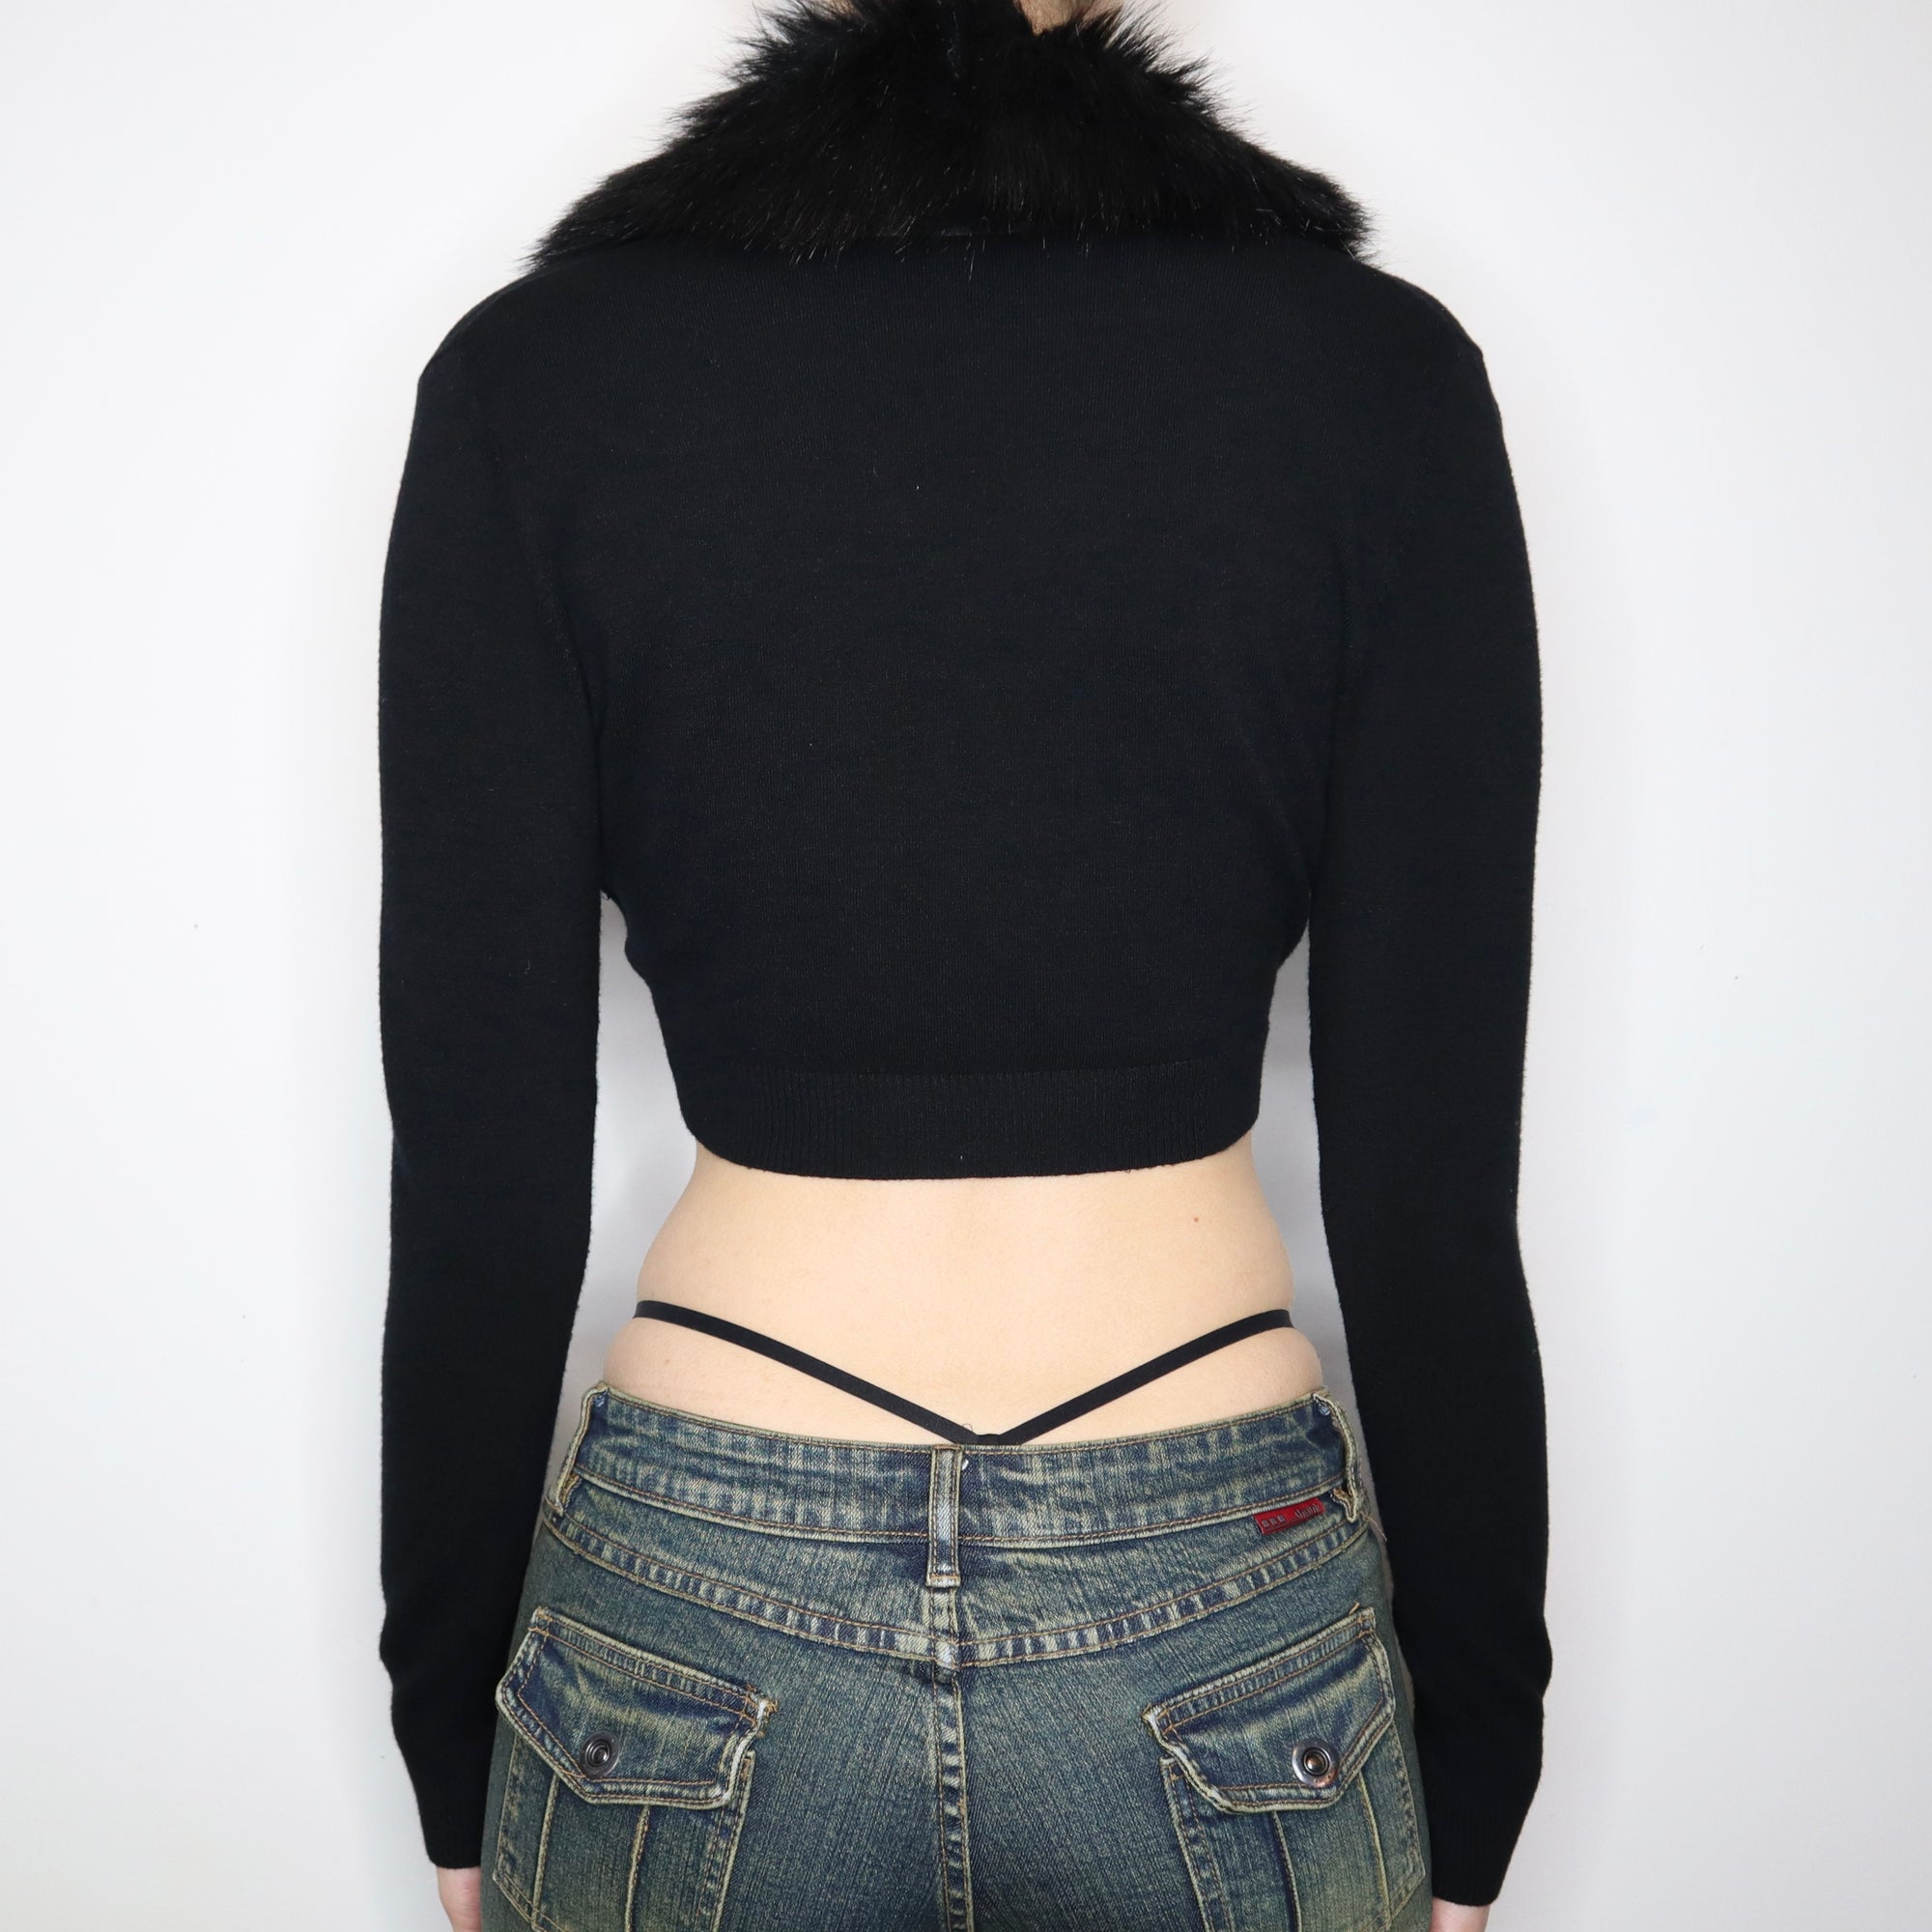 Vintage Early 2000s Black Cropped Cardigan